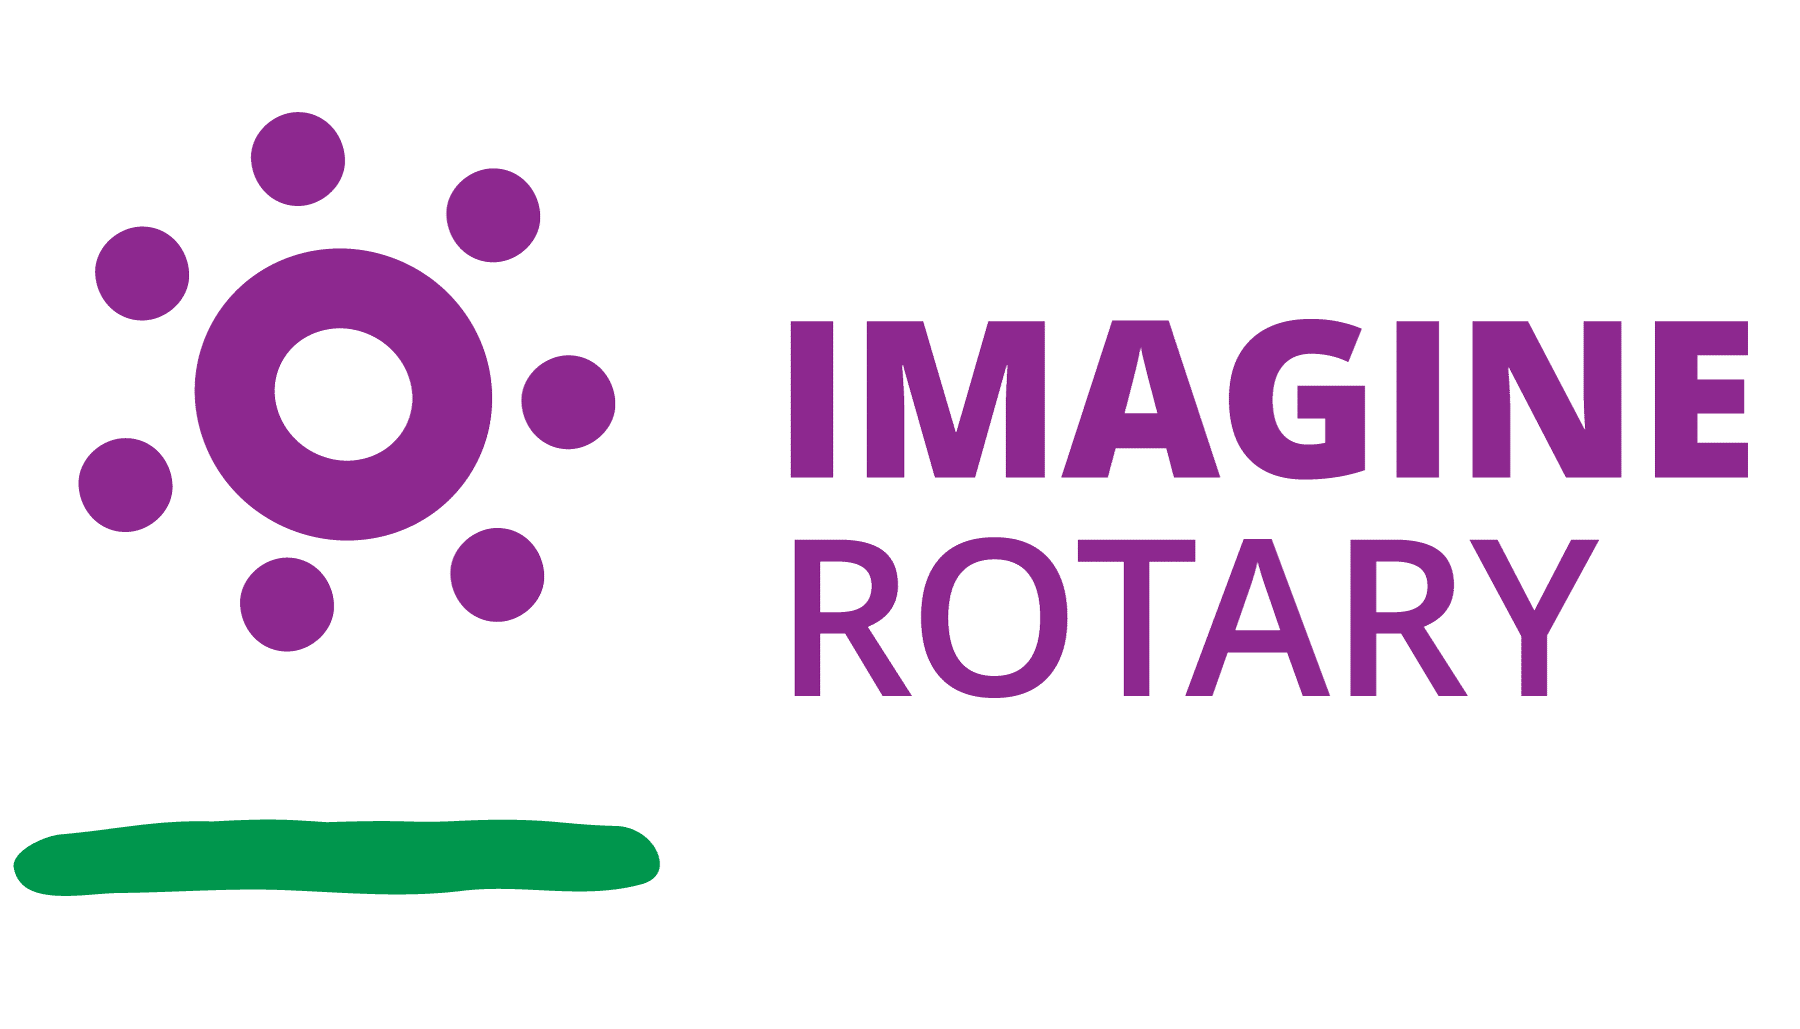 Imagine Rotary is the Theme for 2022/23 Year